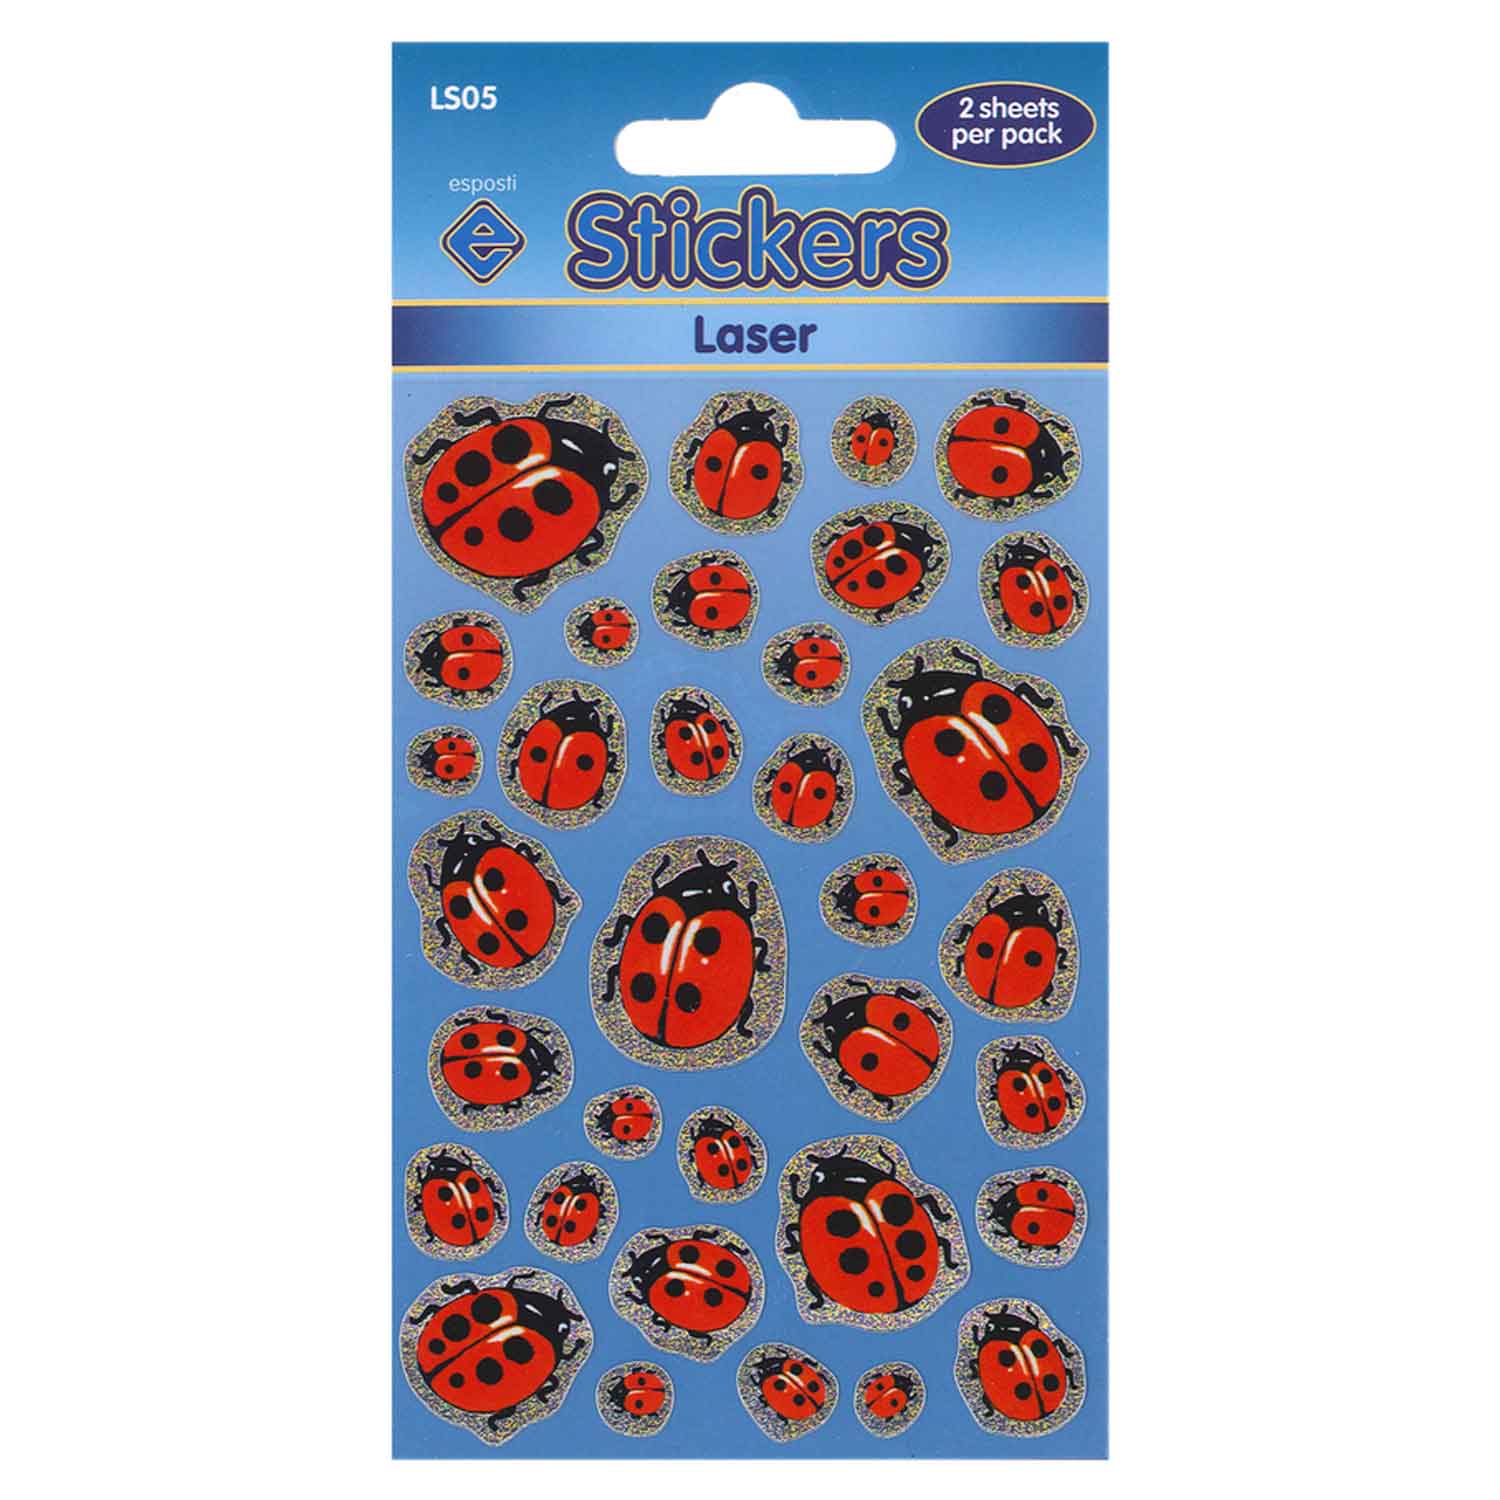 Ladybirds Self Adhesive Laser Novelty Stickers - Pack of 10